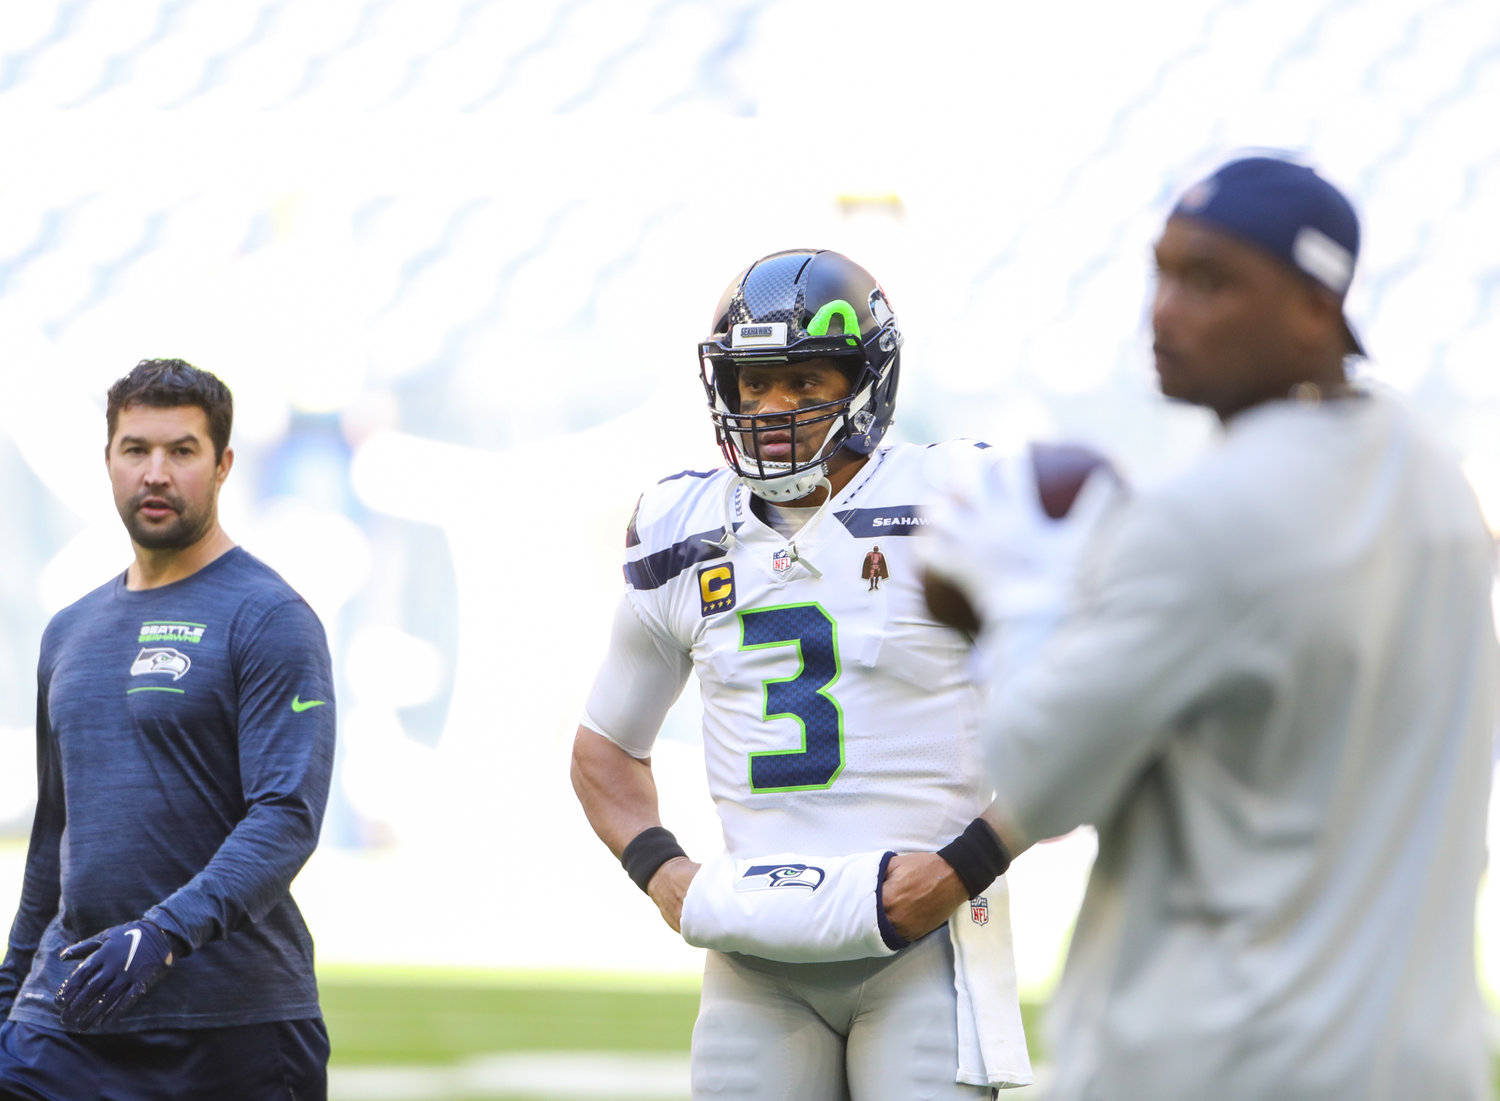 Seattle Seahawks quarterback Russell Wilson (3) warms up before the start of an NFL game between the Seahawks and the Texans on December 12, 2021 in Houston, Texas.